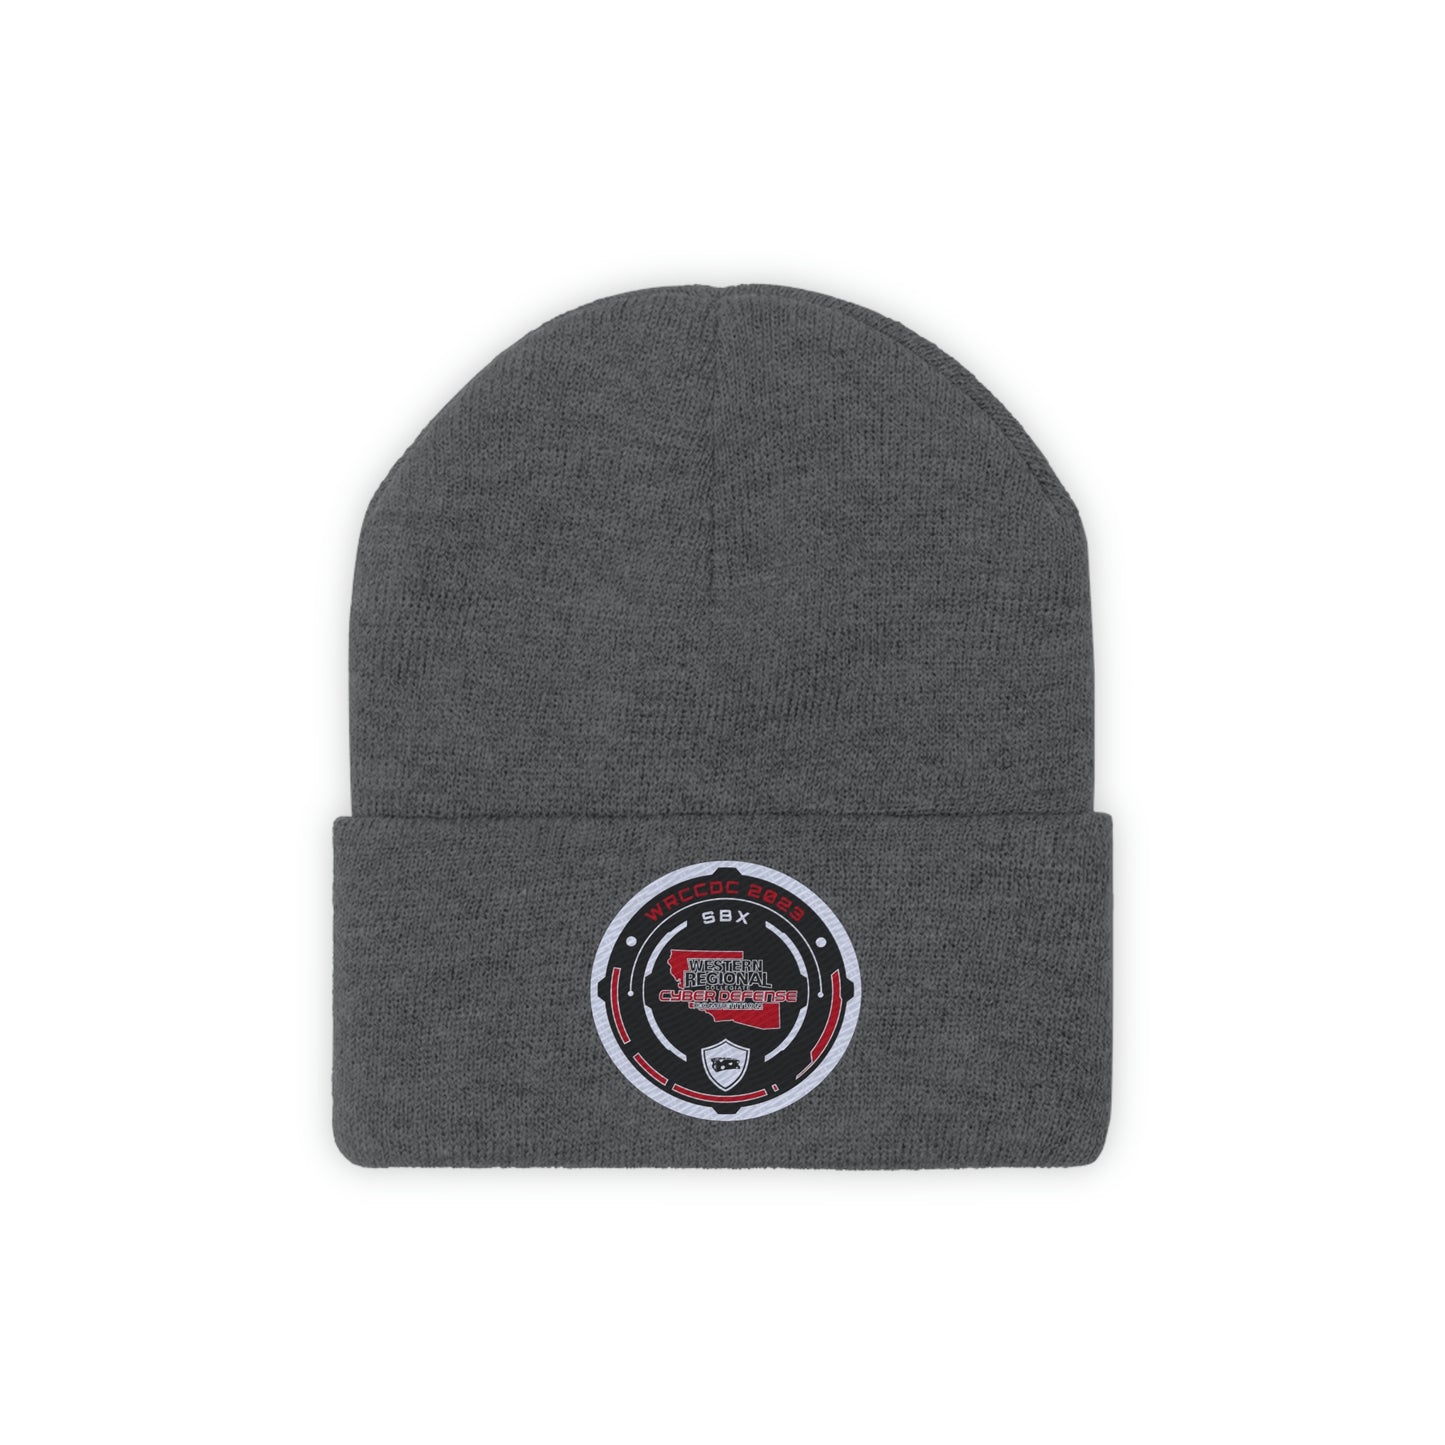 WRCCDC 2023 Competition Coin Knit Beanie